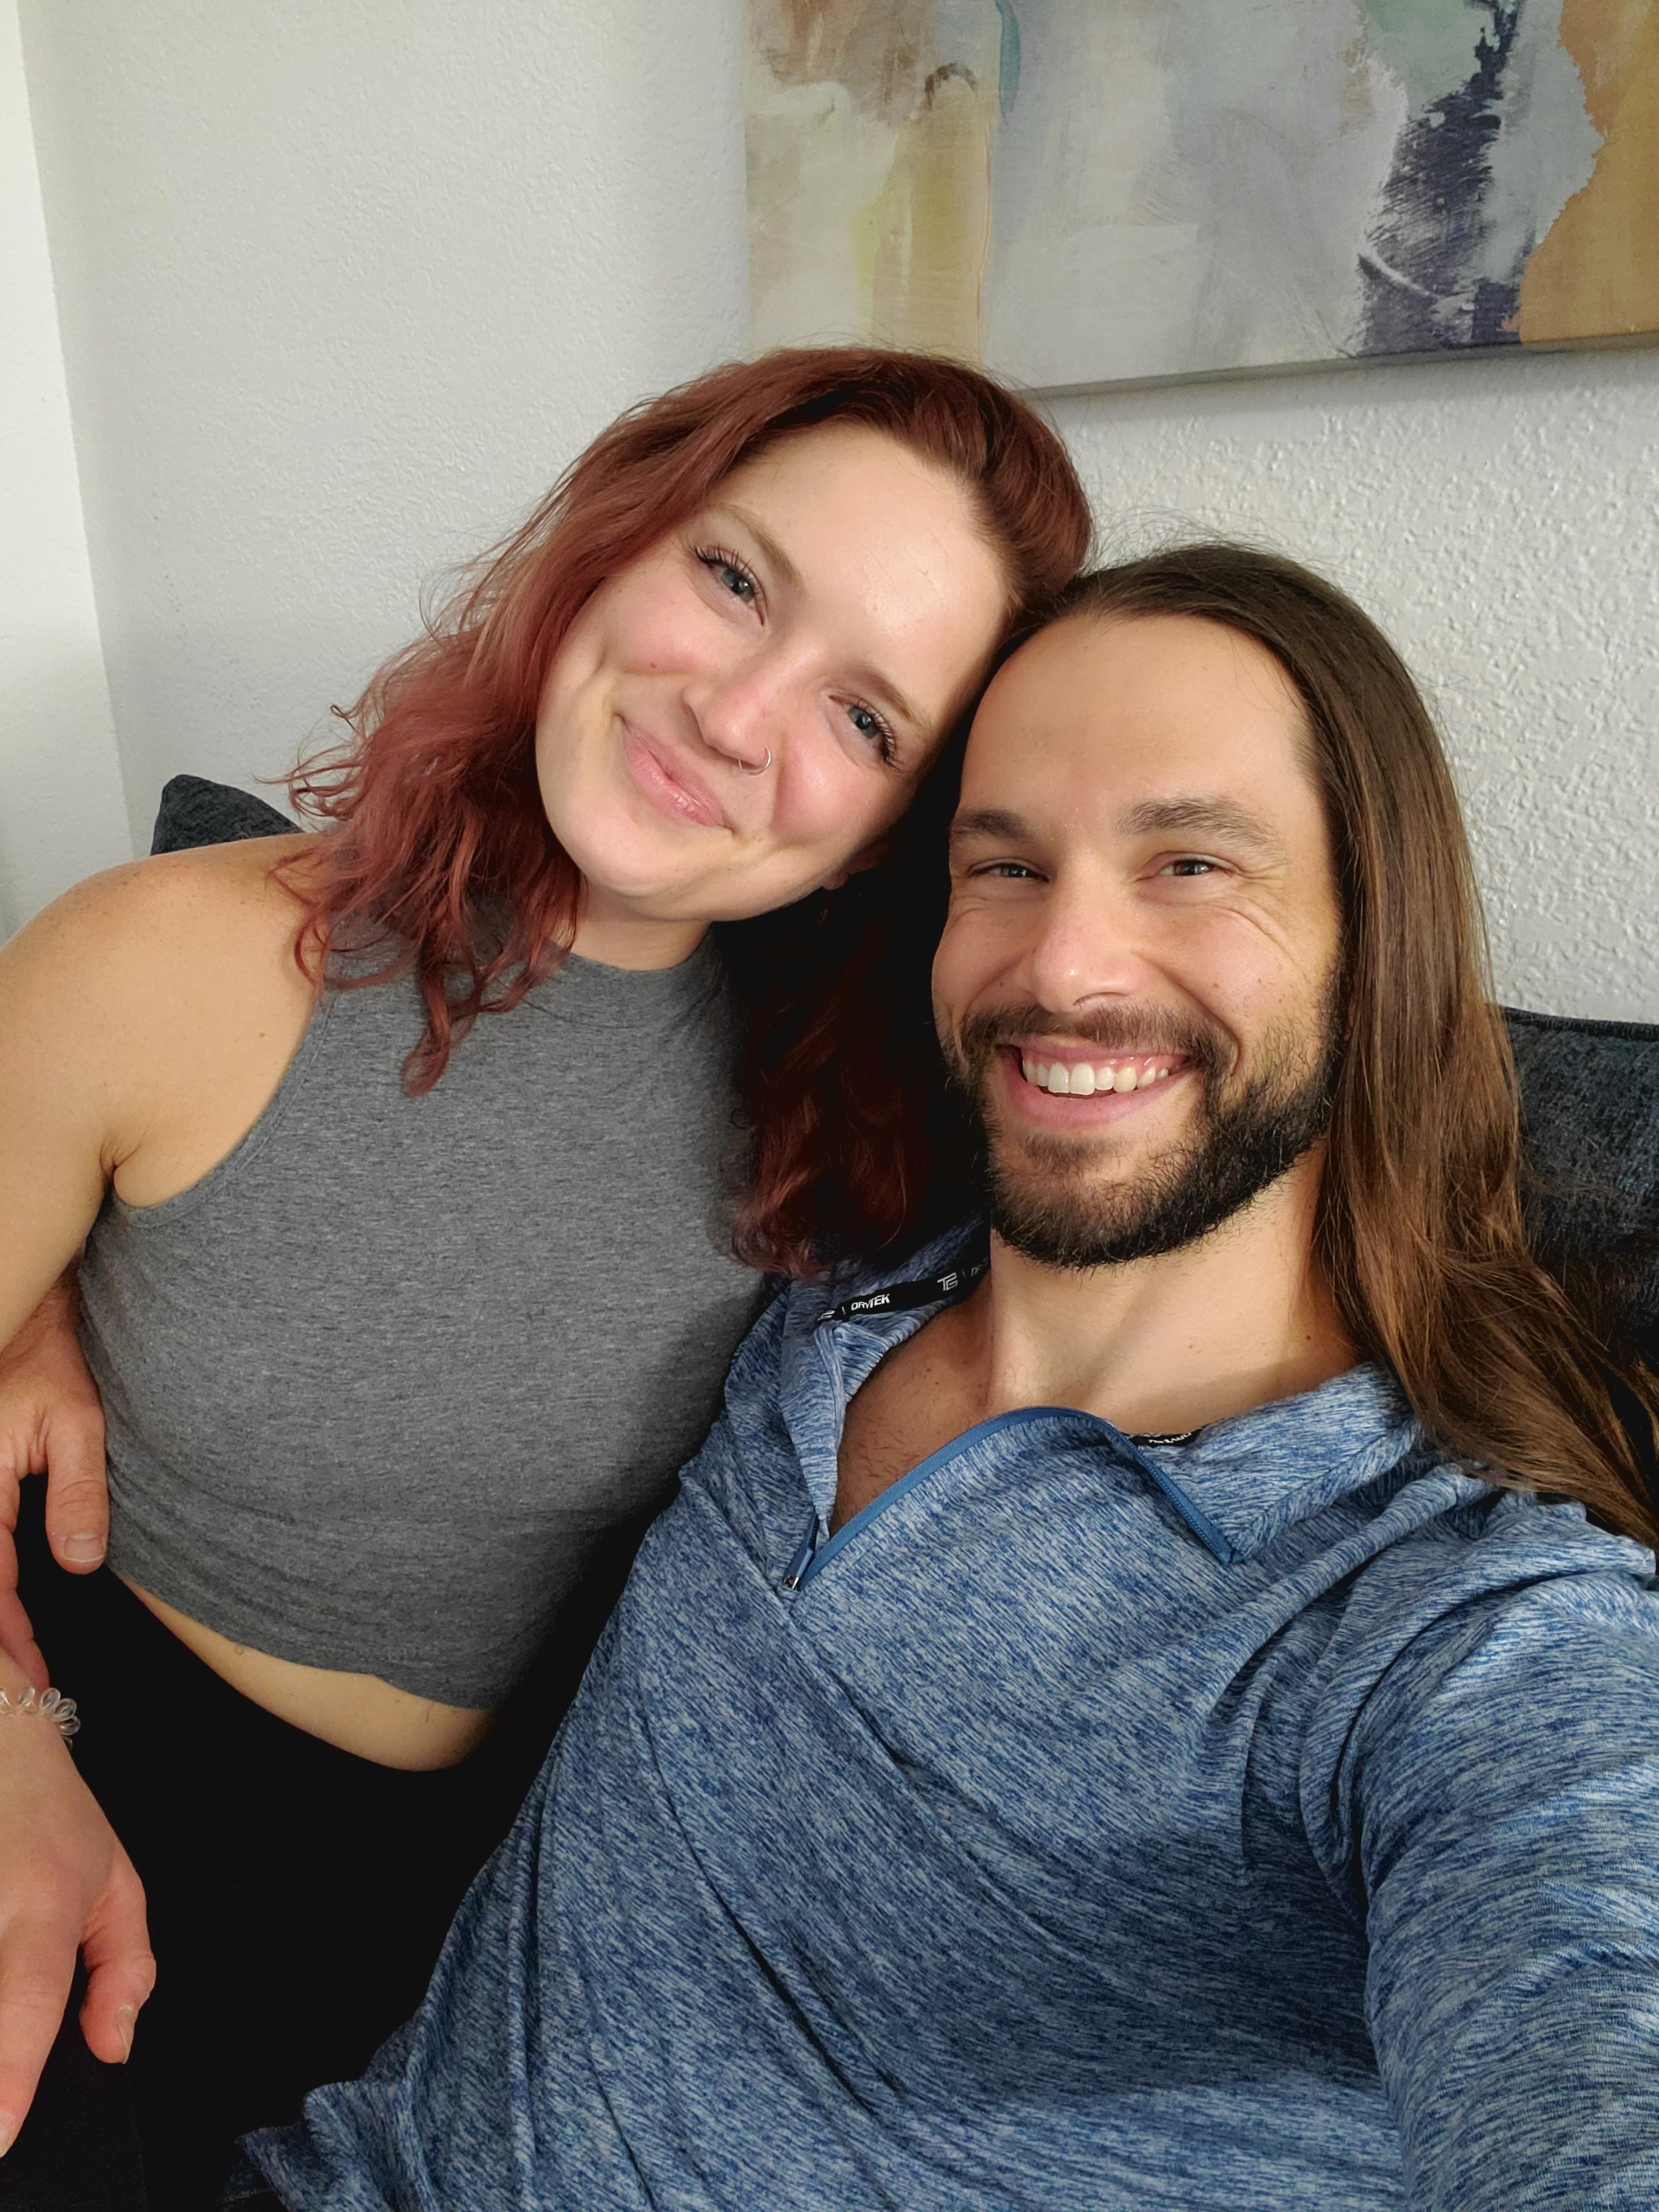 My Fiancé and I Started Camming—People Pay to Watch Us Have Sex pic pic